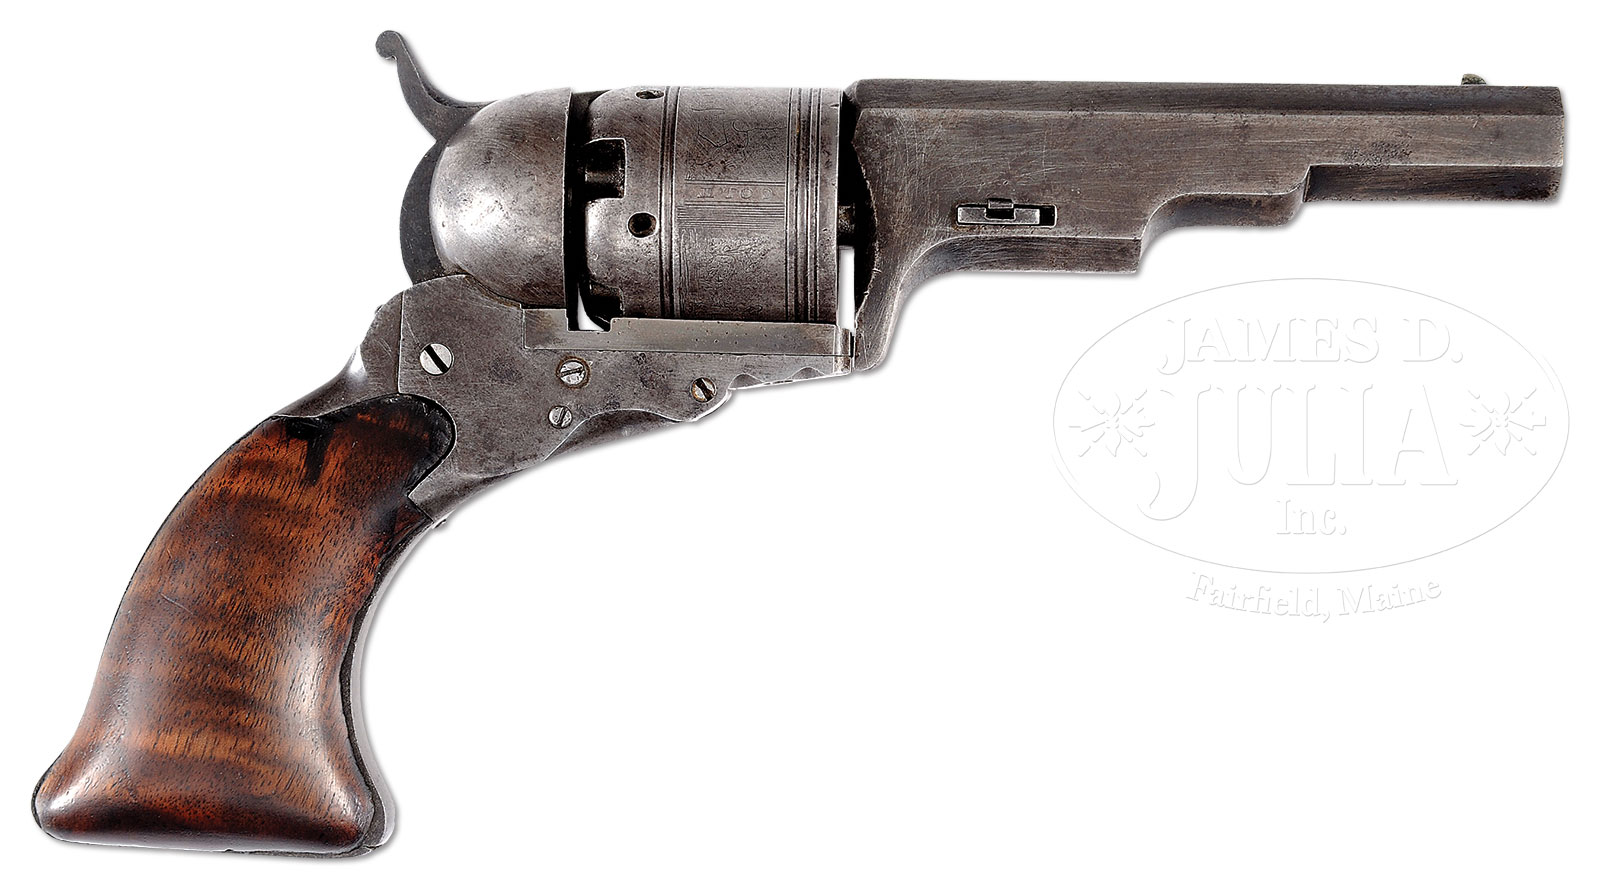 EXTREMELY RARE COLT NO. 5 TEXAS PATERSON REVOLVER WITH FACTORY 4-1/4″ BBL PICTURED ON PG 144 OF THE PATERSON COLT BOOK.